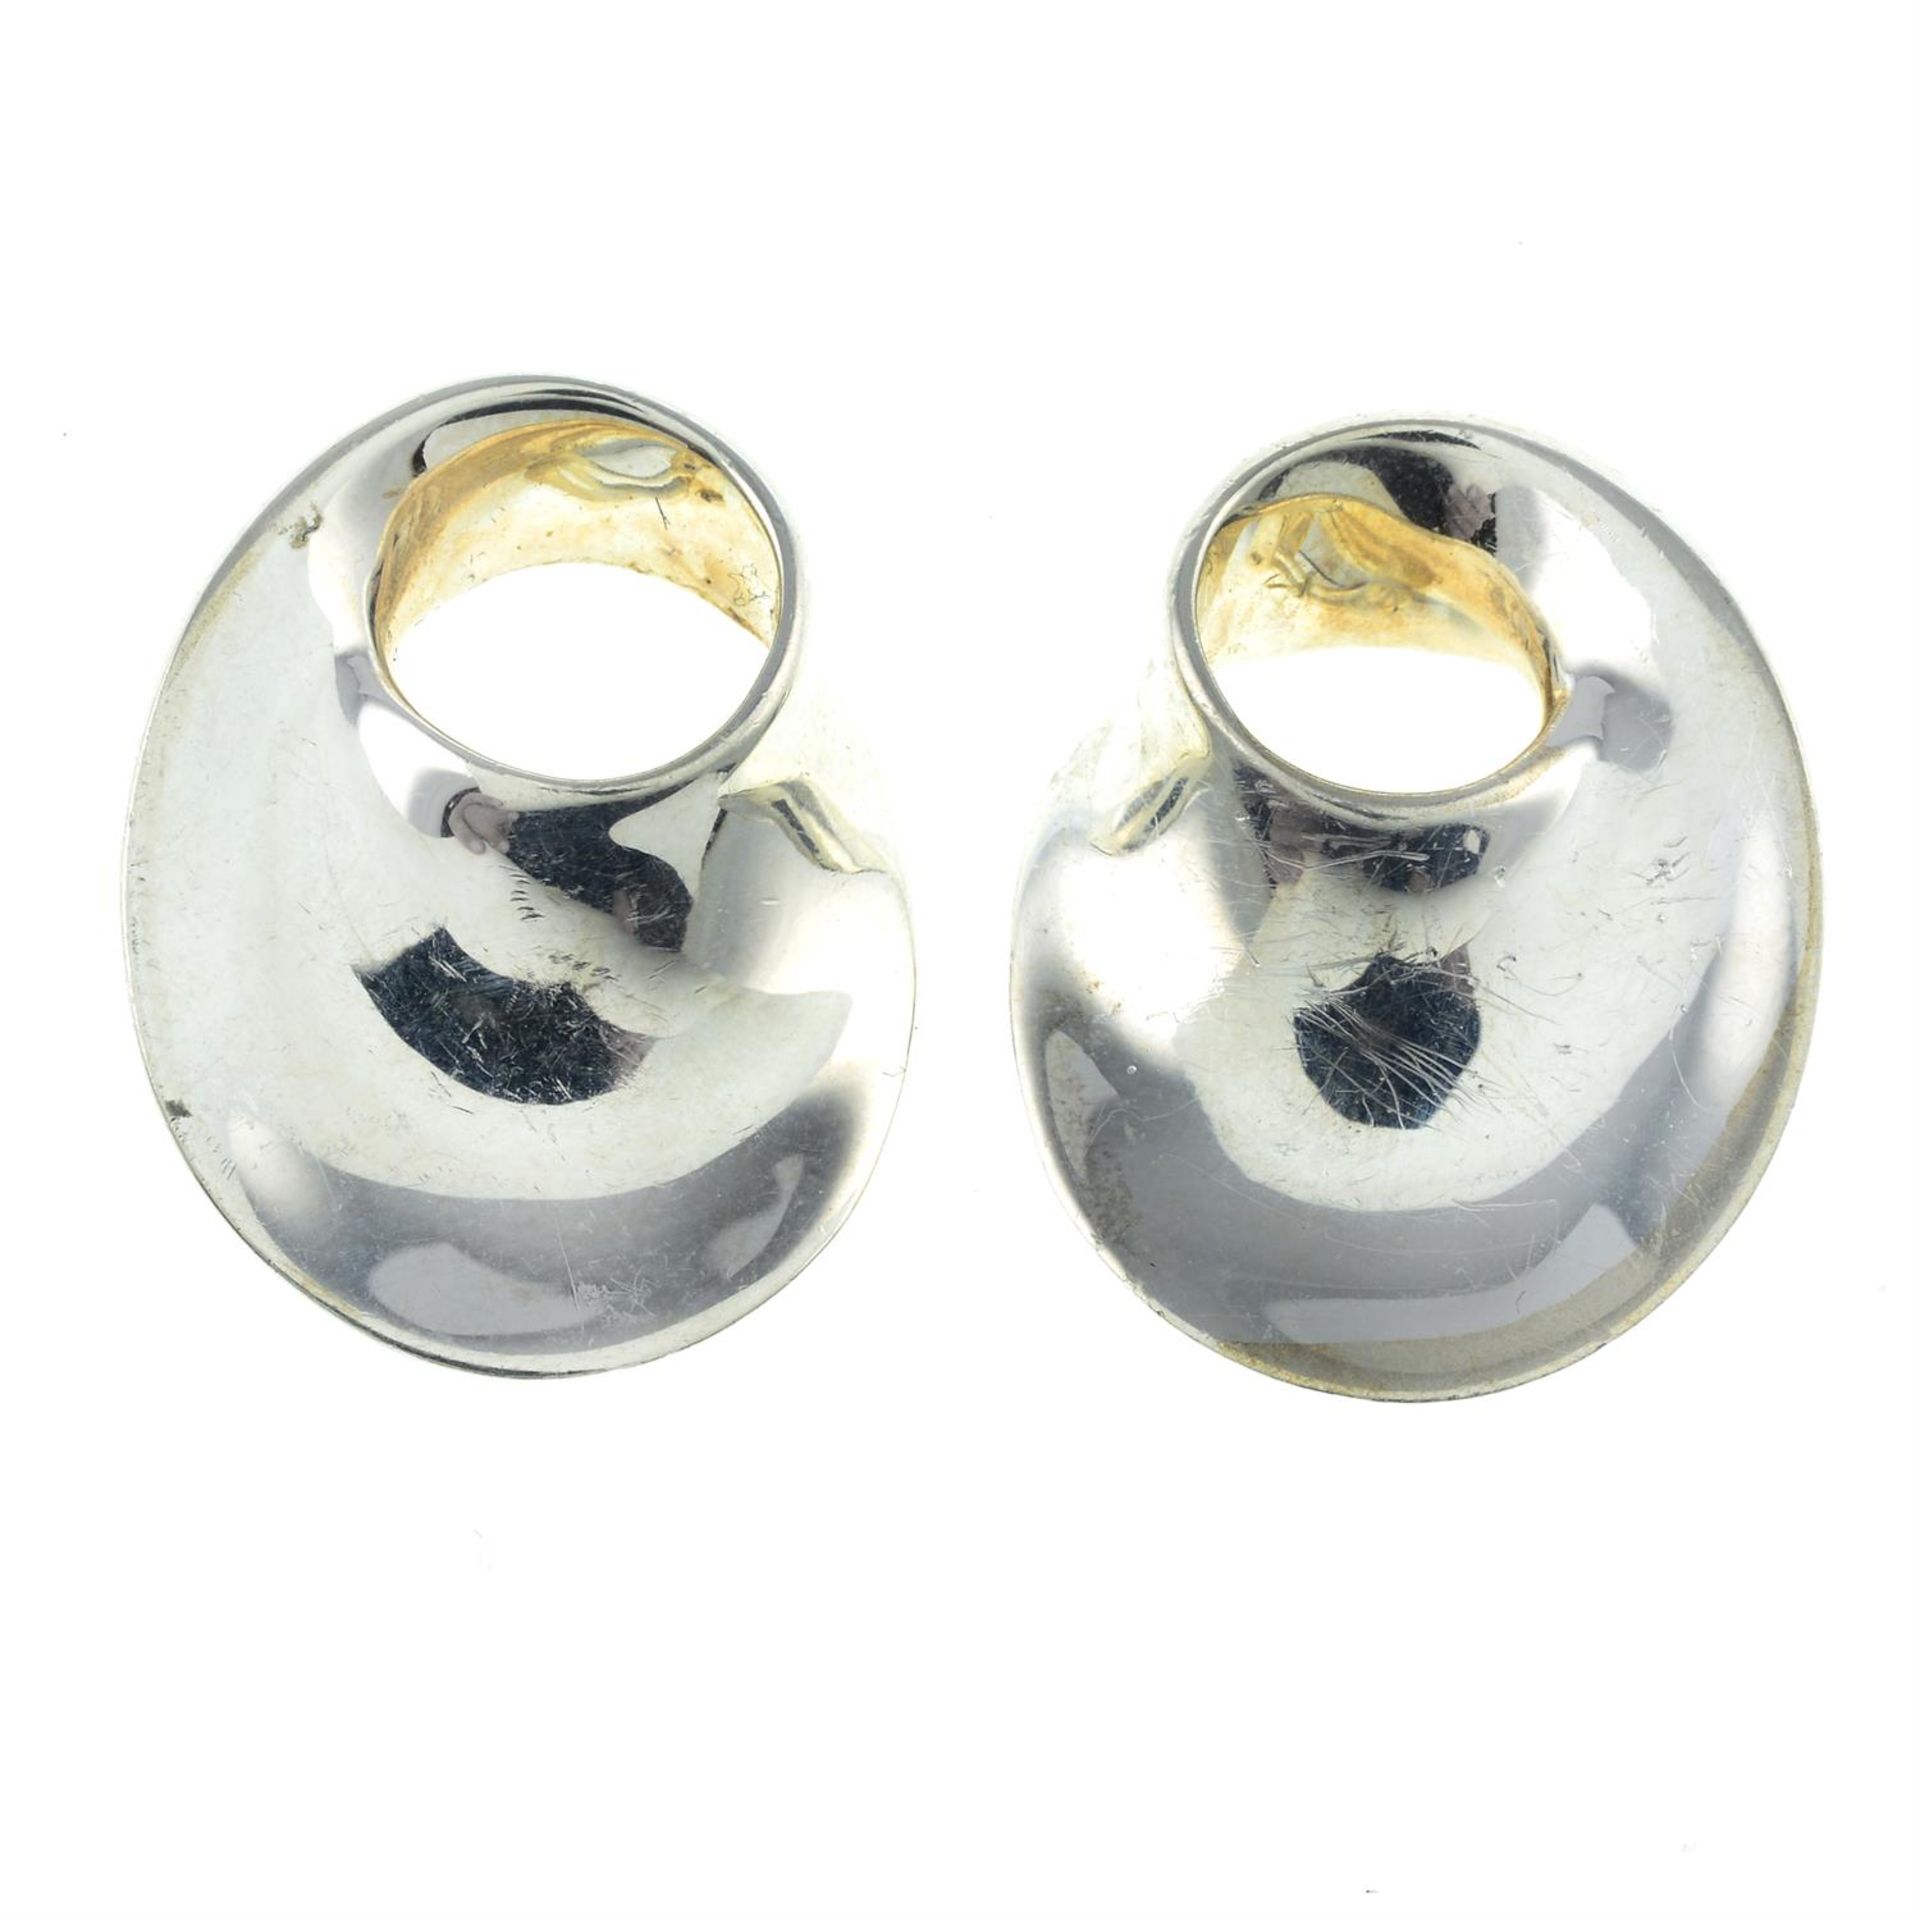 A pair of silver 'Mobiuis' earrings, by Georg Jensen.